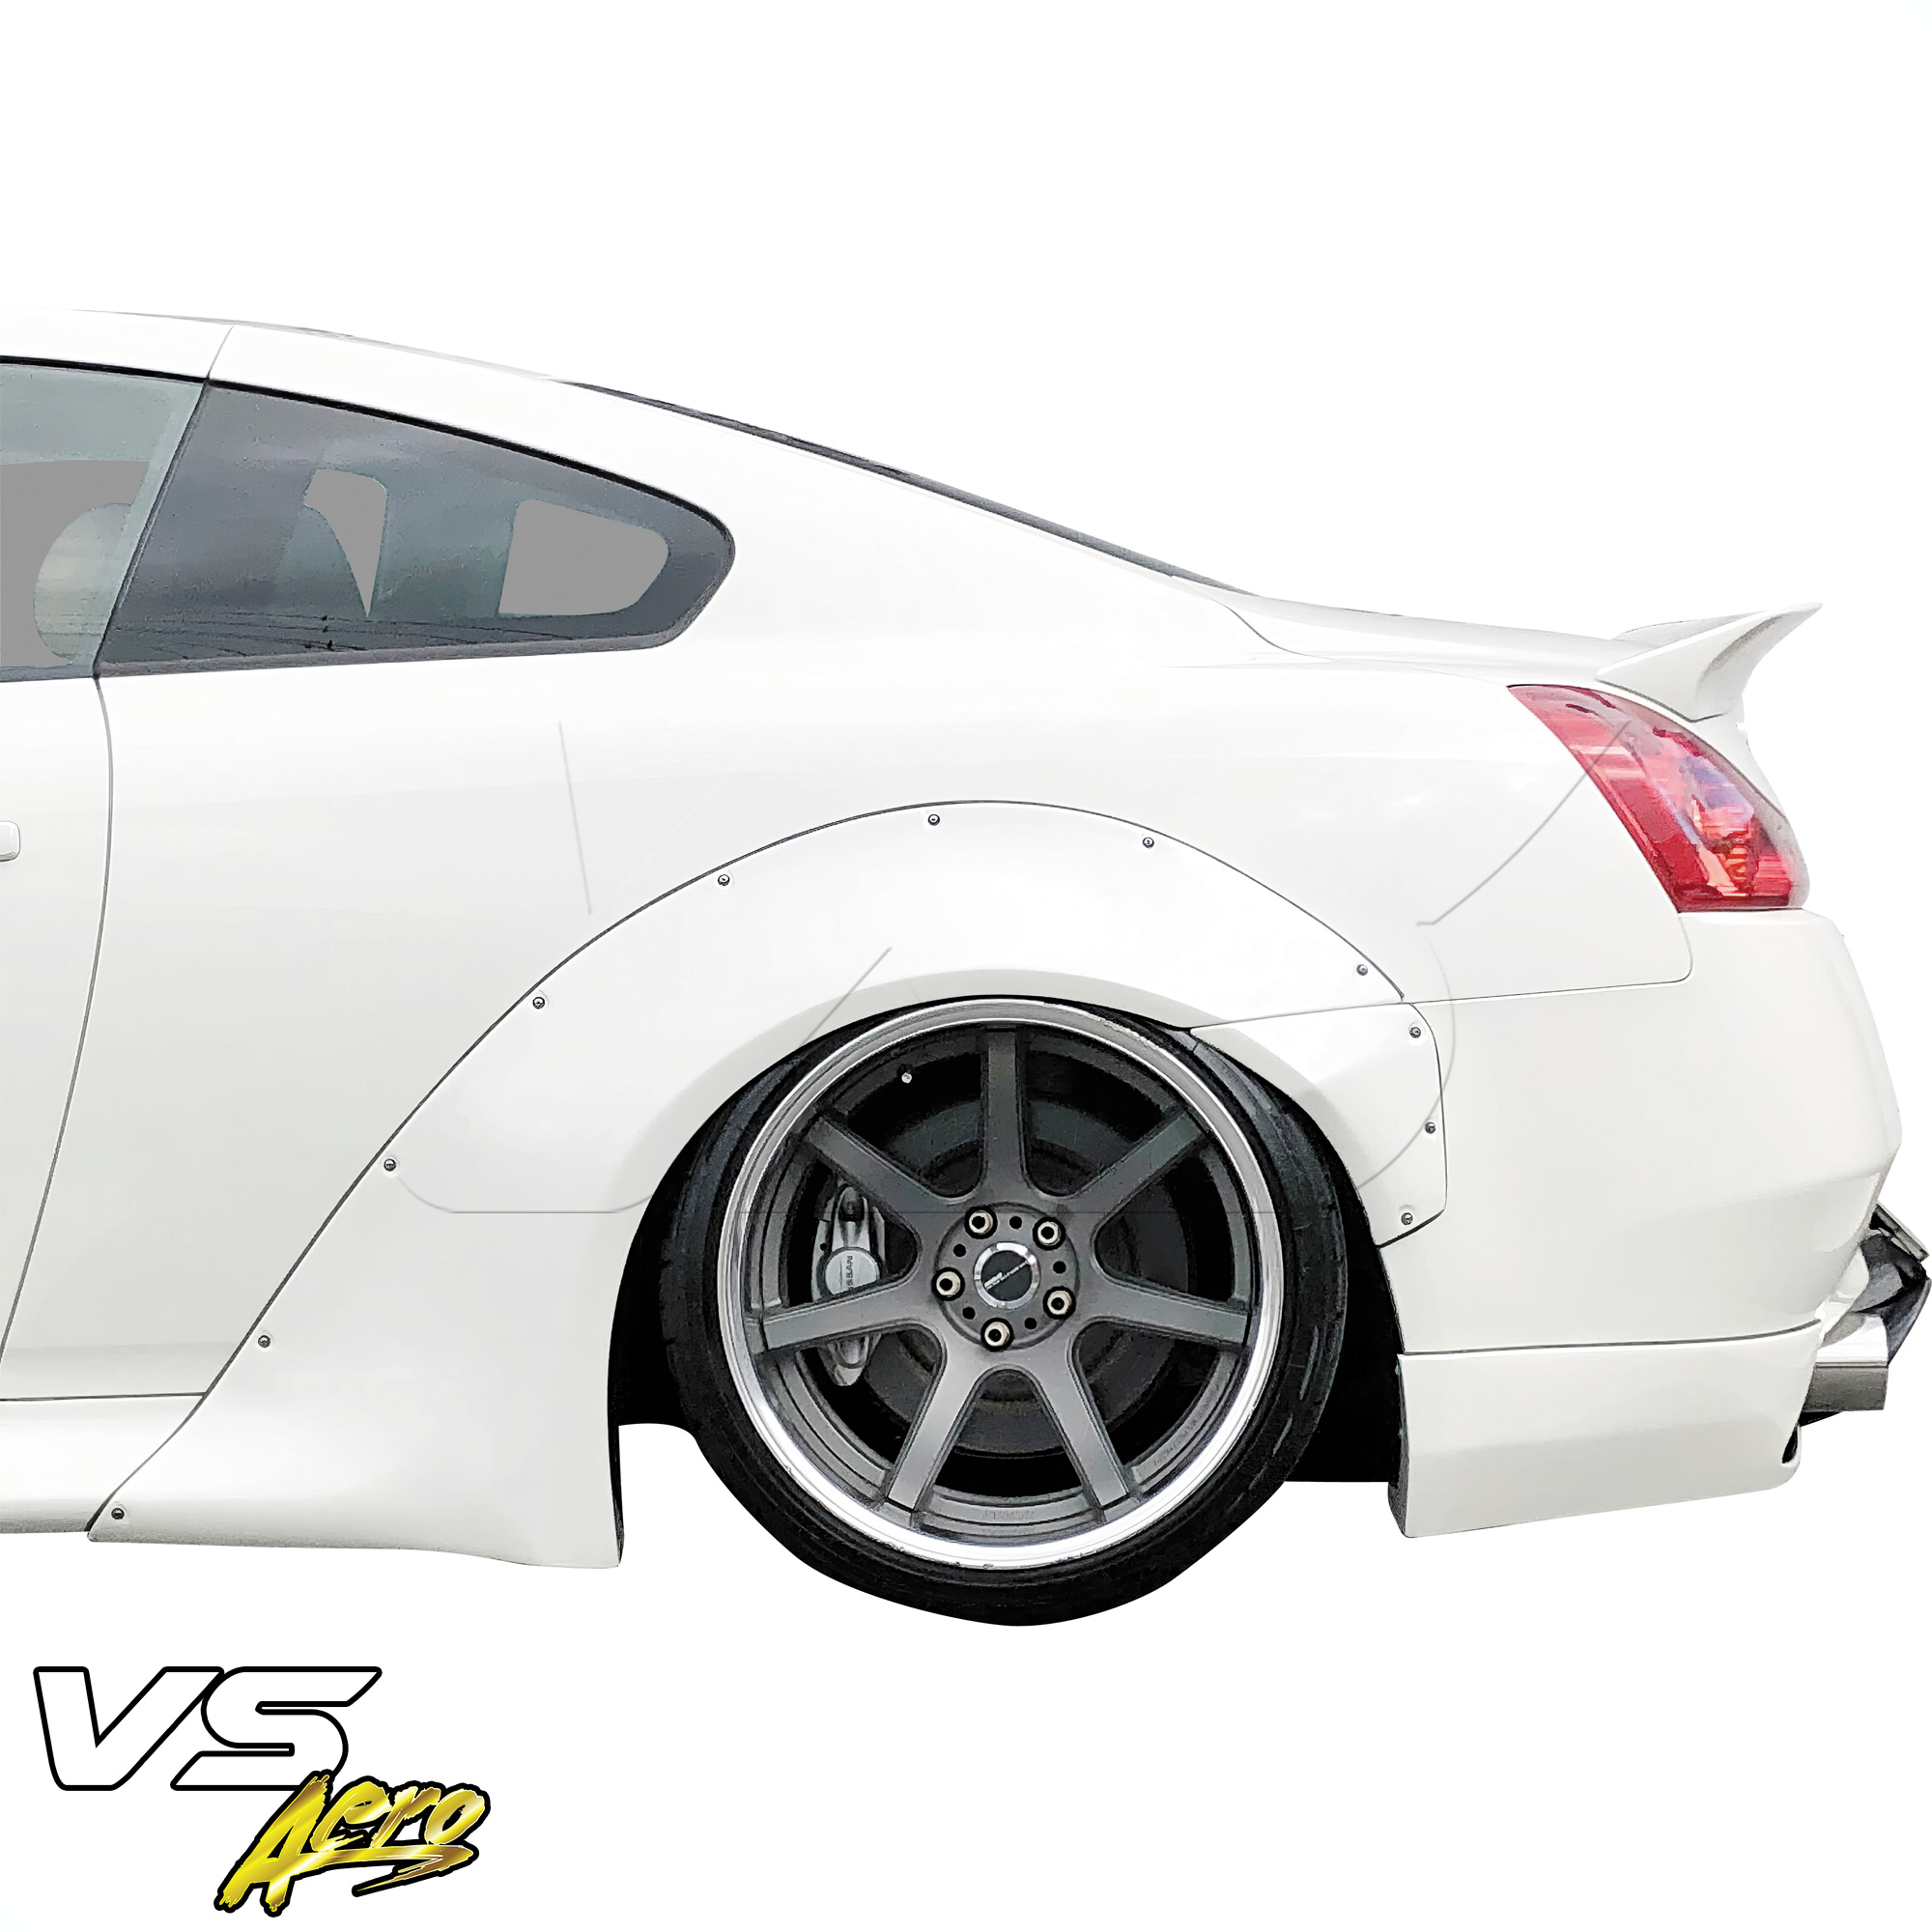 VSaero FRP LBPE Wide Body Fender Flares (rear) 4pc > Infiniti G37 Coupe 2008-2015 > 2dr Coupe - Image 27